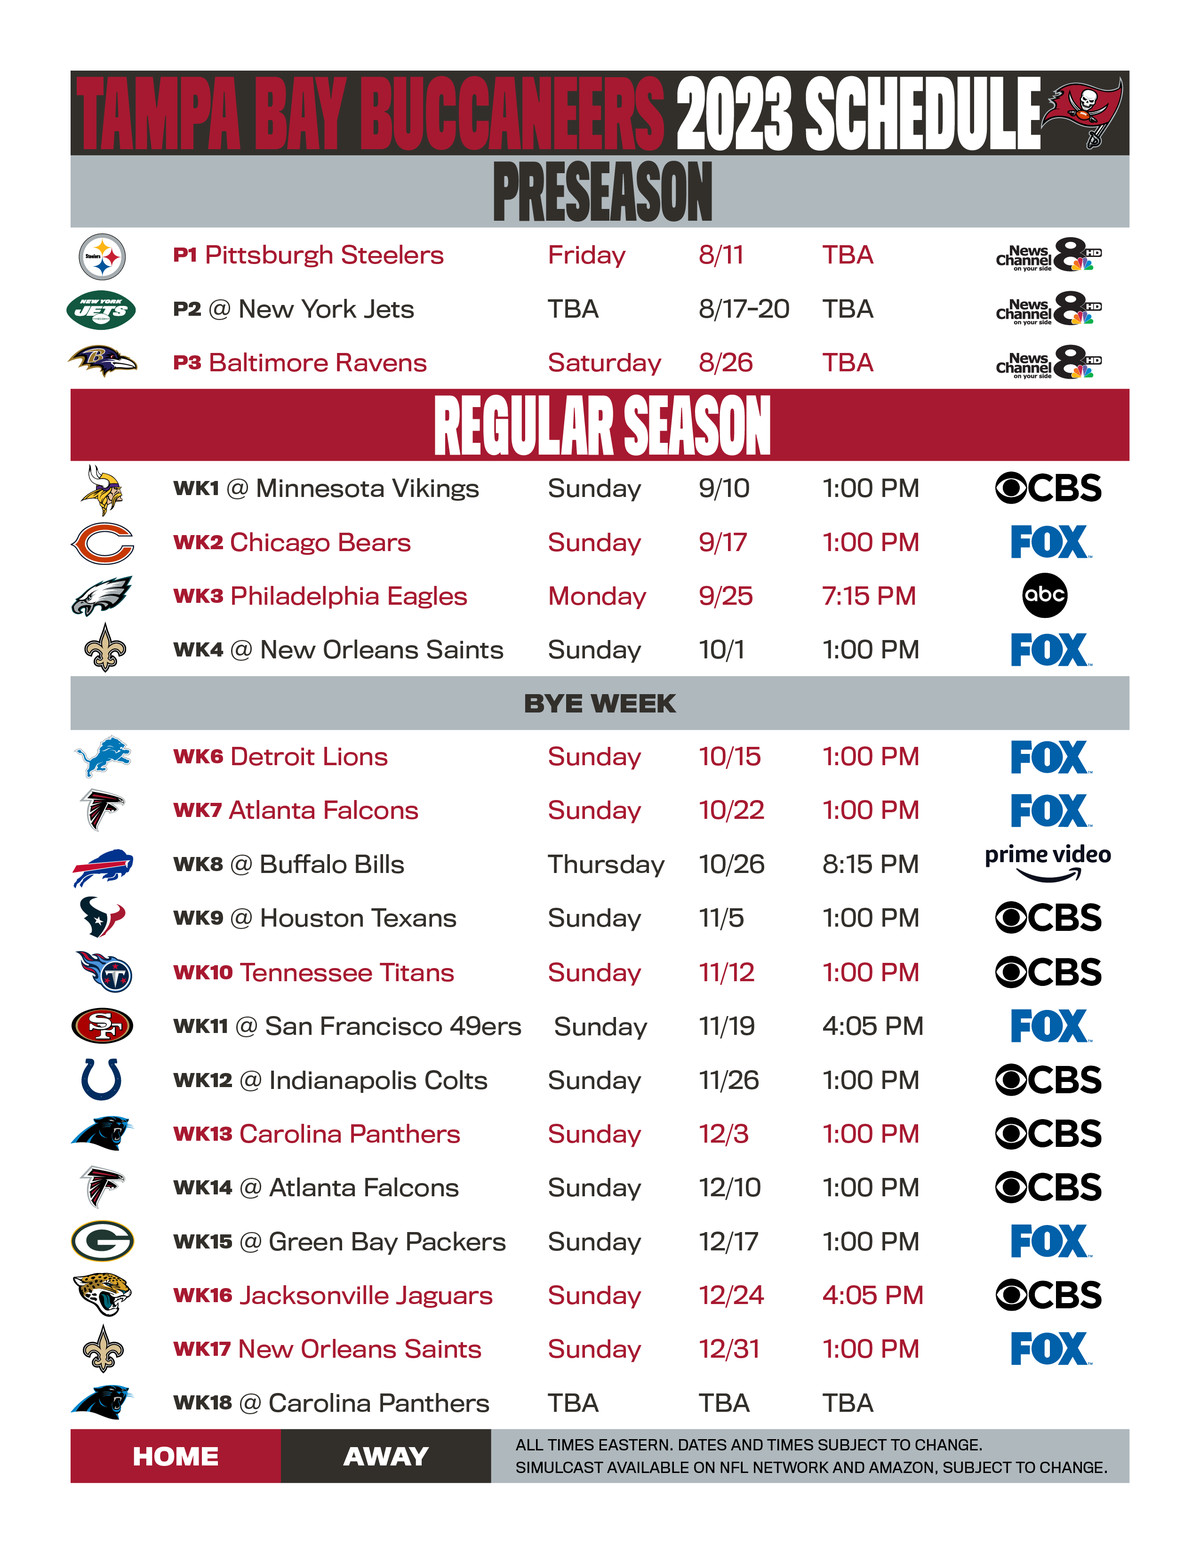 games today nfl channels